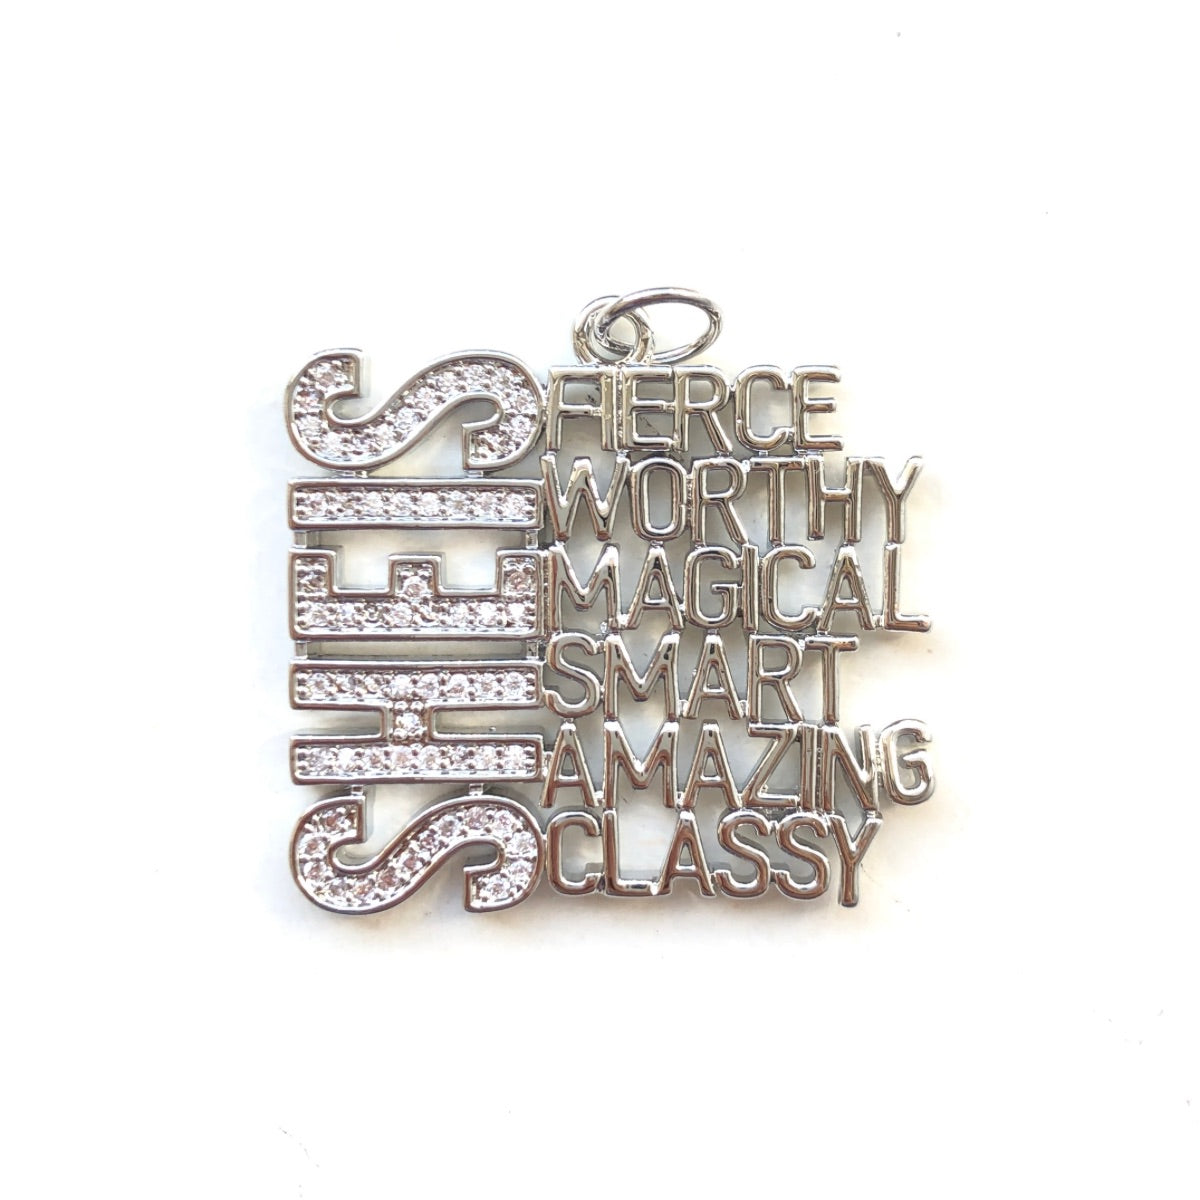 10pcs/lot CZ SHE IS FIERCE WORTHY MAGICAL SMART AMAZING CLASSY Word Charms Silver CZ Paved Charms New Charms Arrivals Words & Quotes Charms Beads Beyond